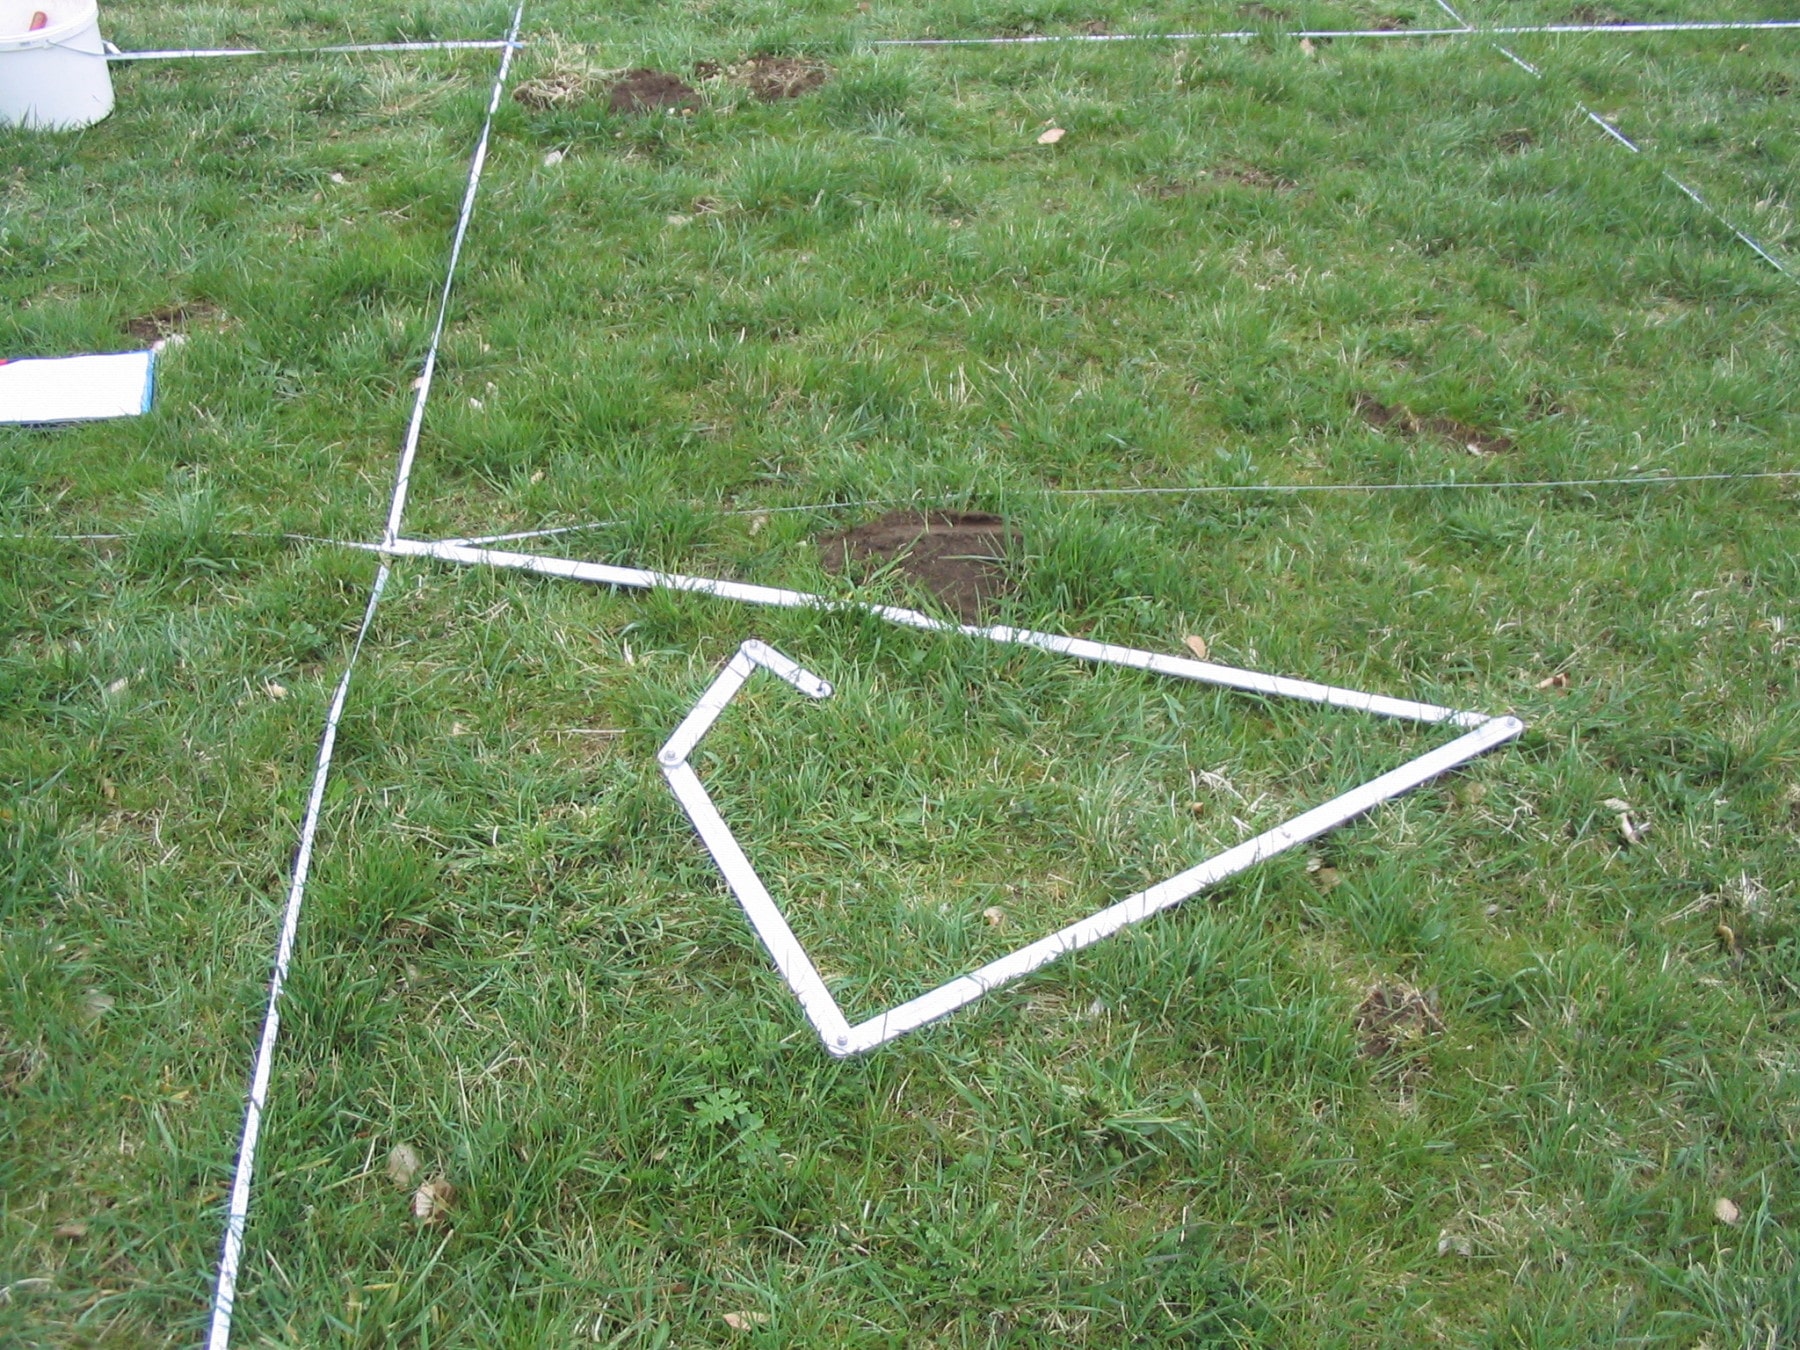 Picture: The photo shows a low grassy meadow with square areas marked with white bands